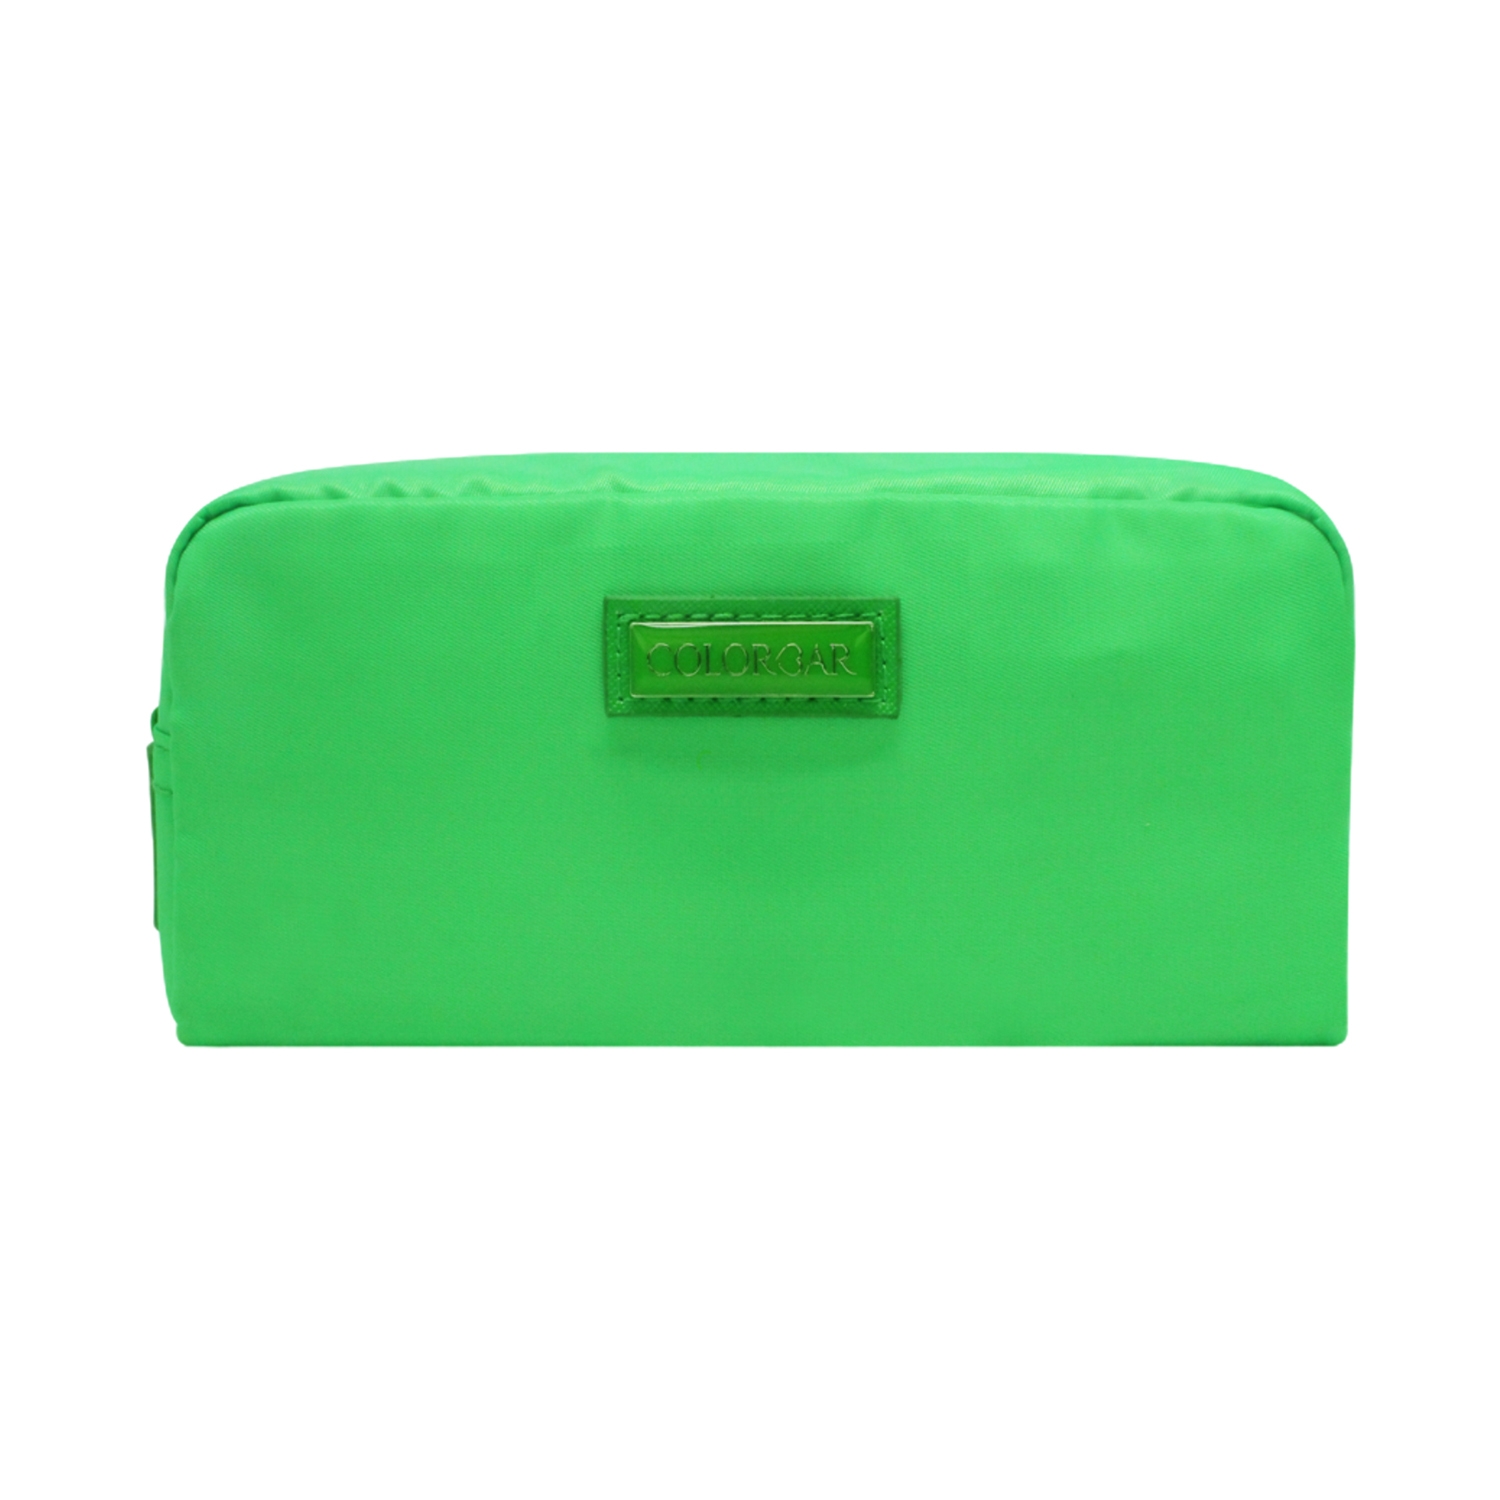 Colorbar | Colorbar Maxi Pouch New - Green